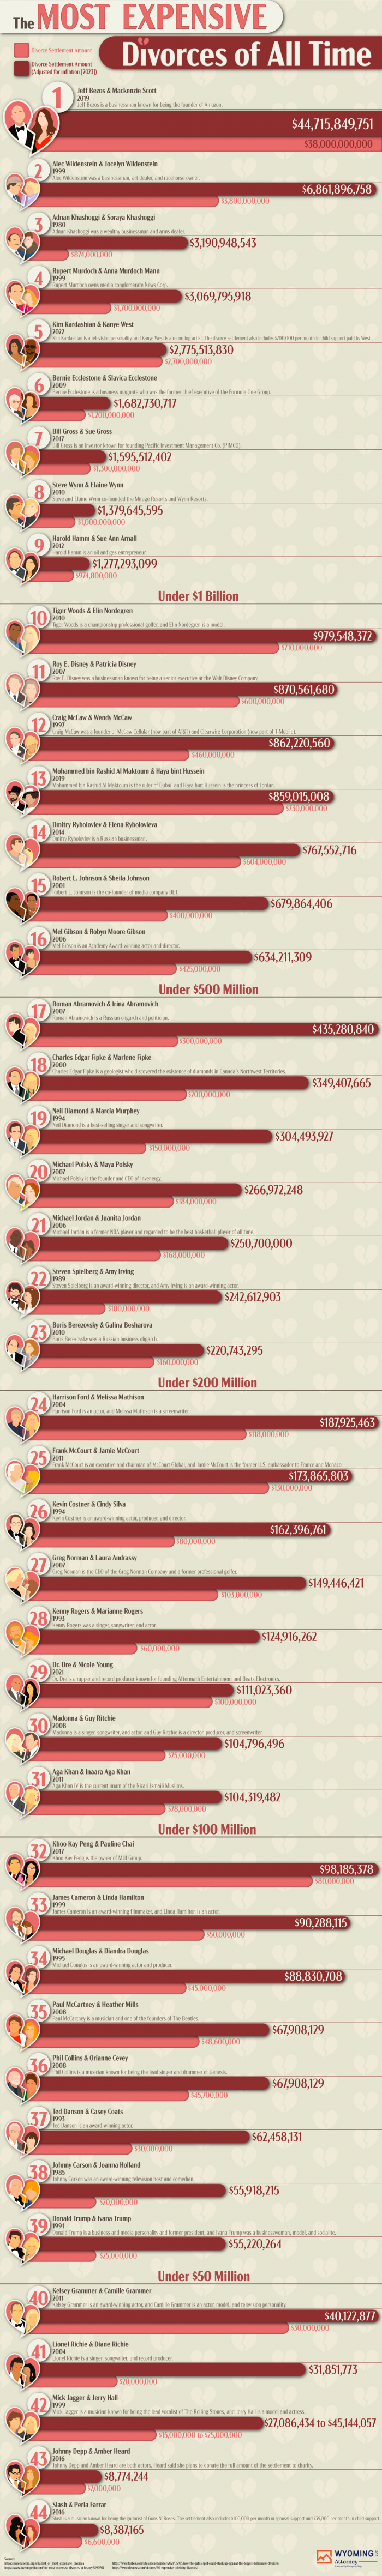 most expensive divorces of all time